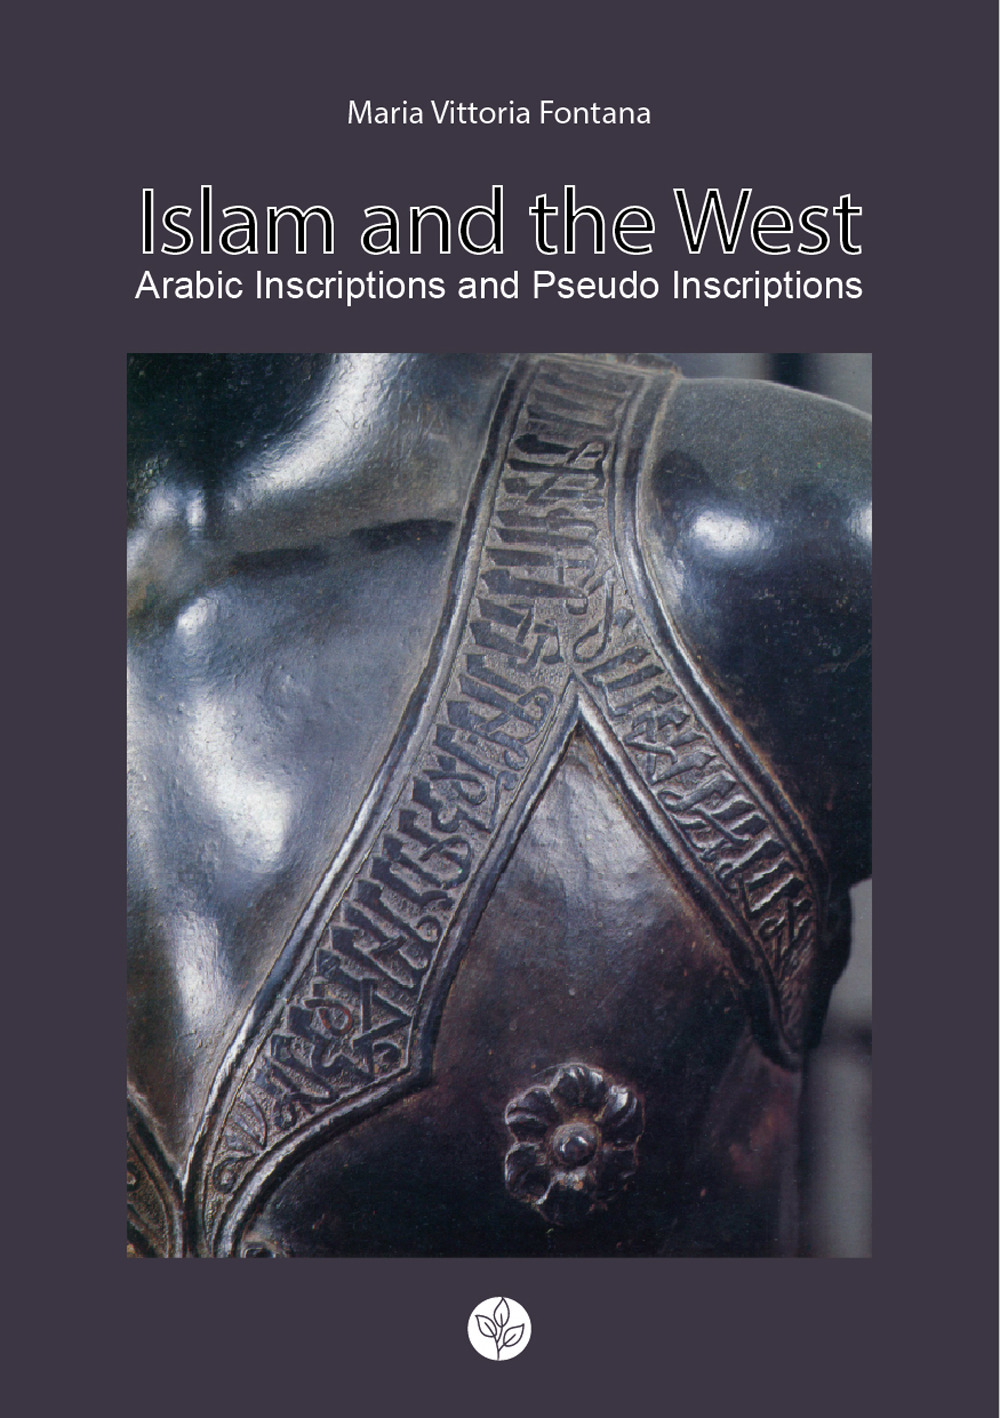 Islam and the West. Arabic inscriptions and pseudo inscriptions